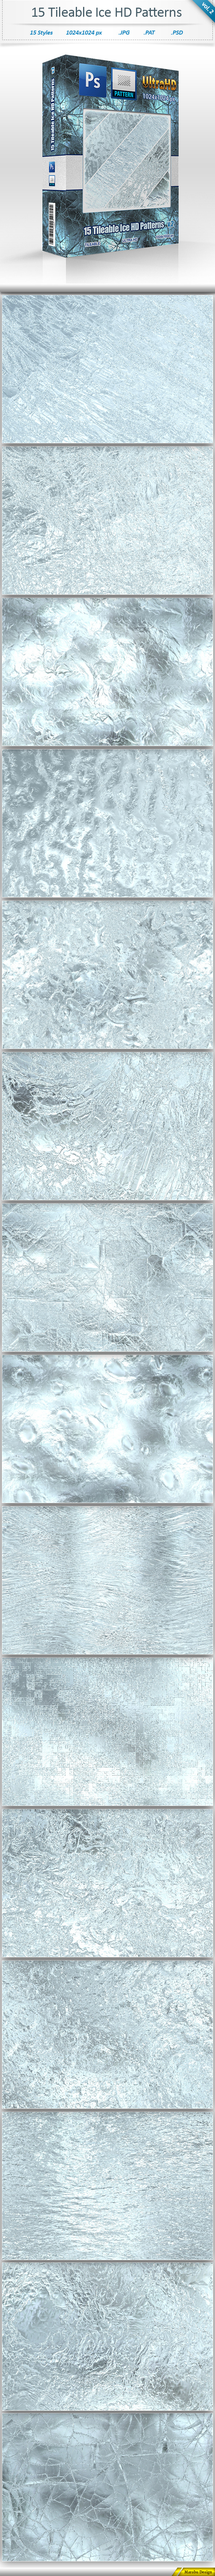 Ice Tileable Pattern Backgrounds (vol 2)